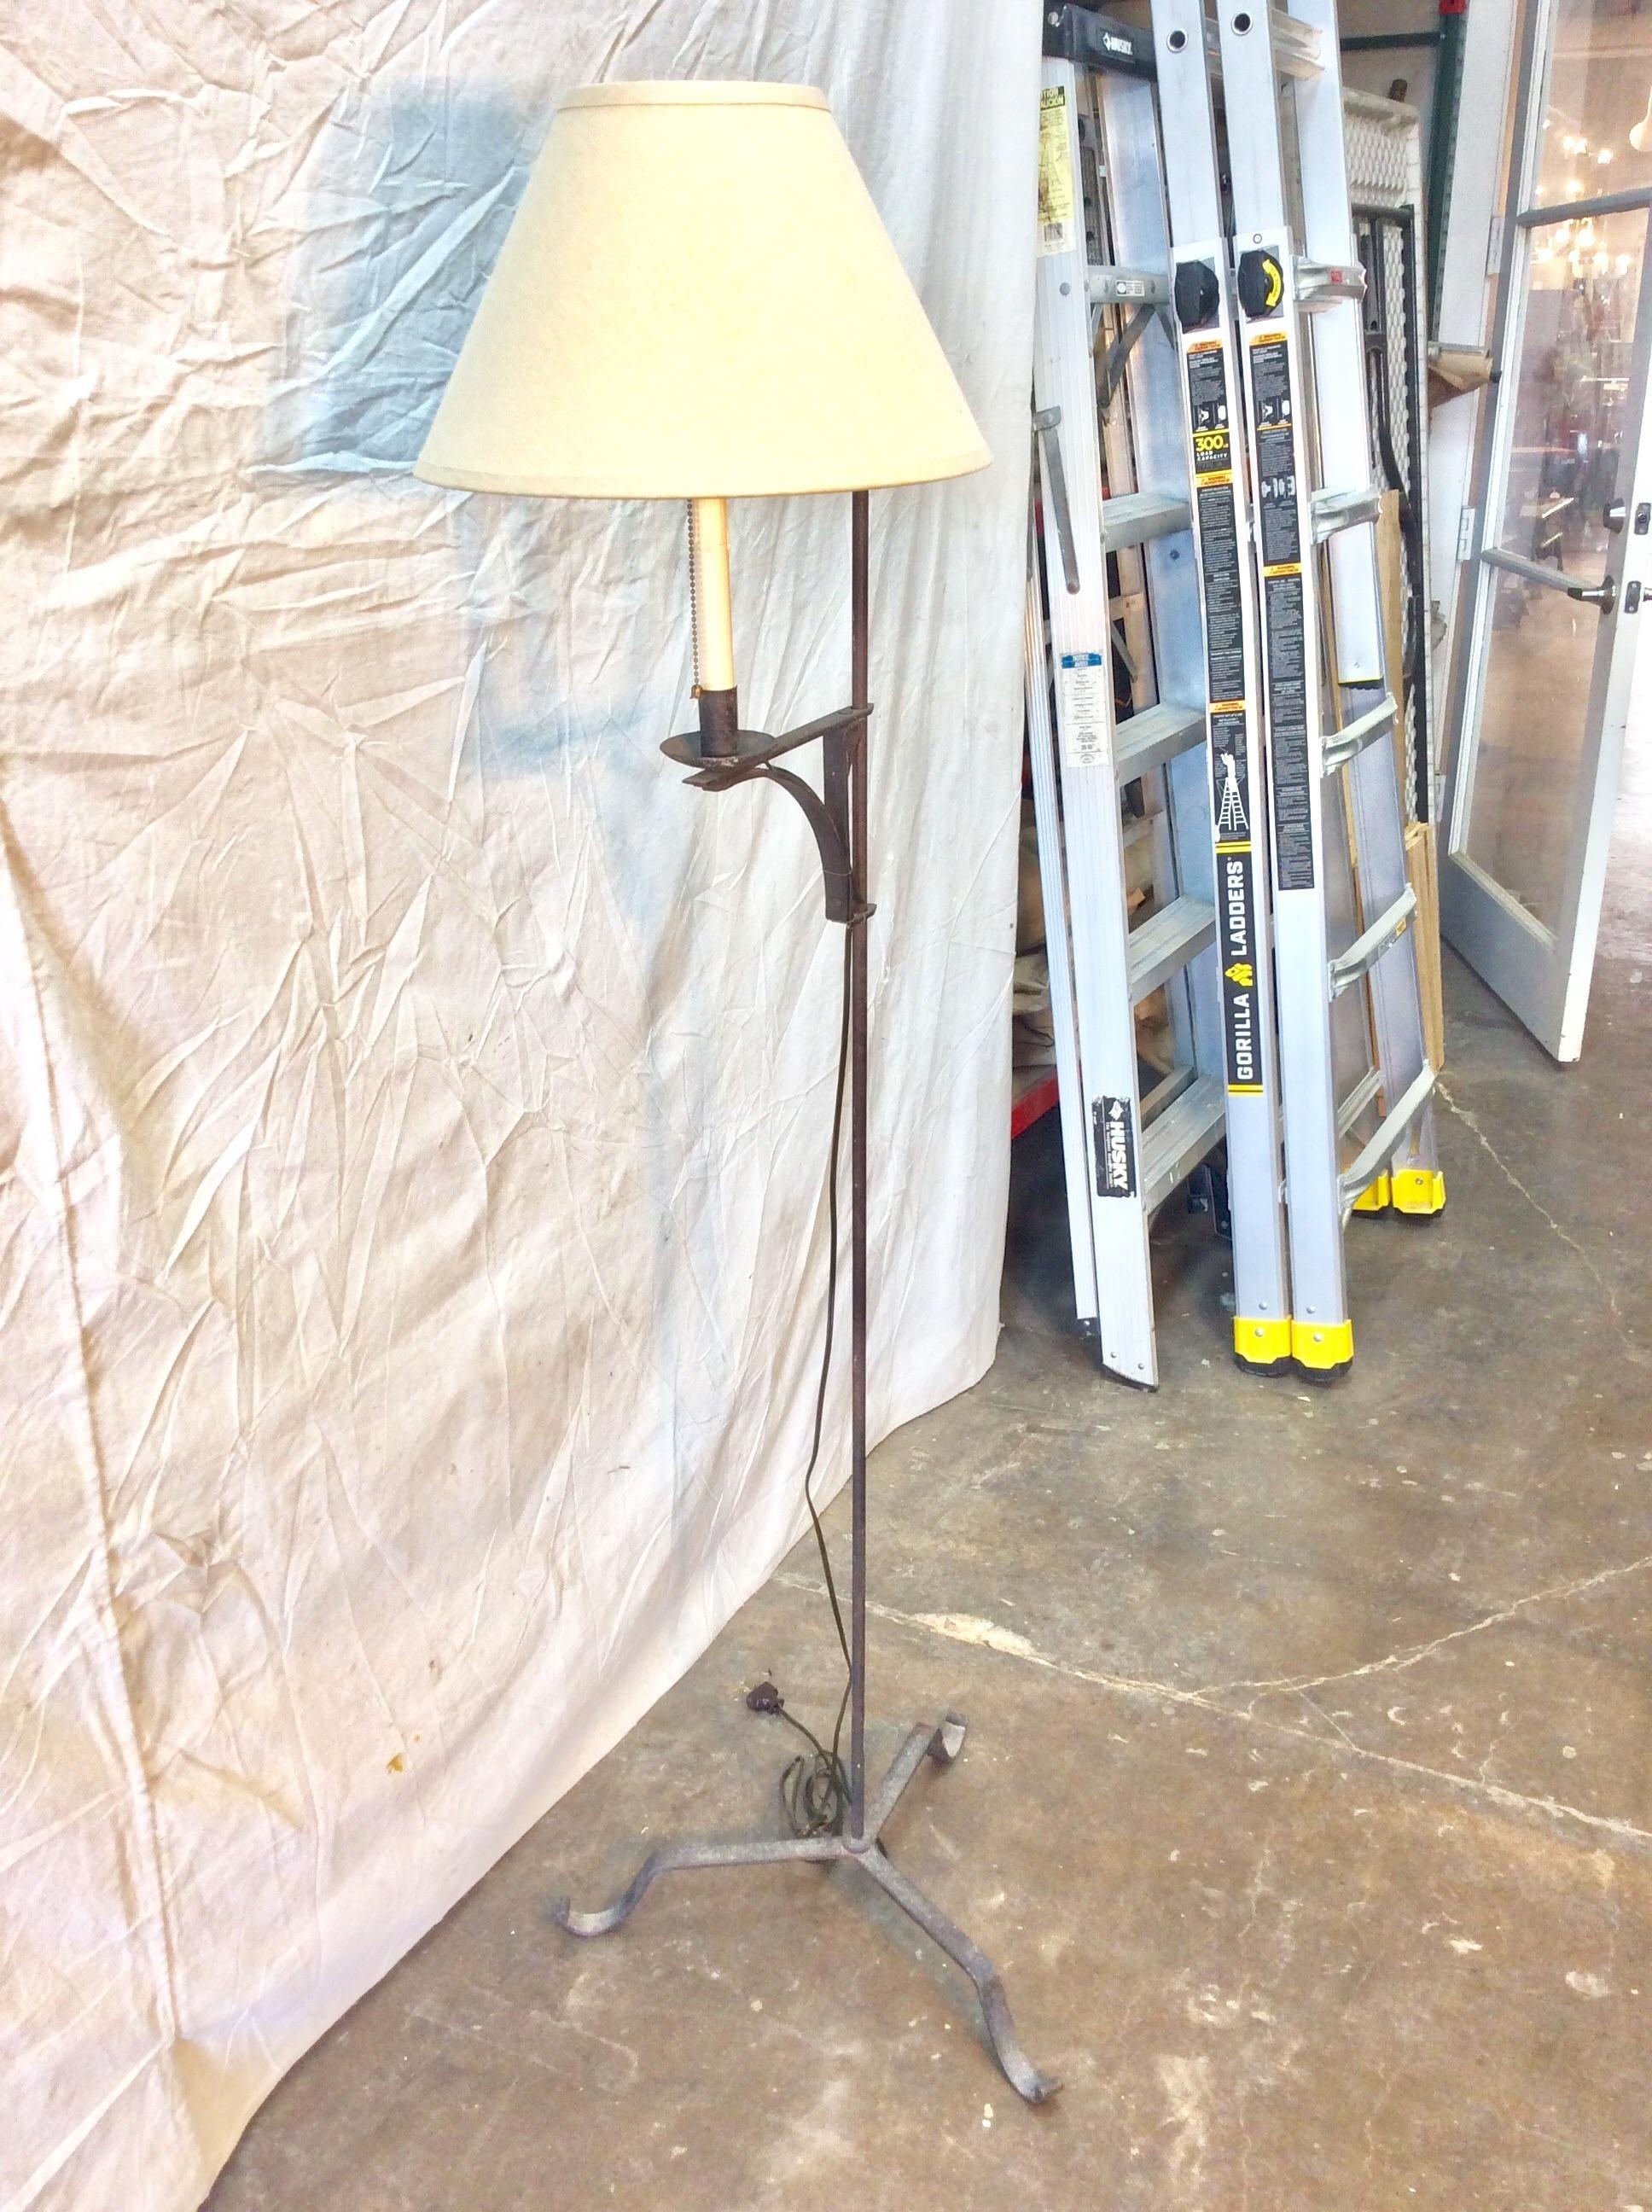 Found in the South of France this Early 20th century French Iron Adjustable Bridge Floor Lamp has been newly wired. The game of bridge was popular during this period, and these lamps used the newly available electricity to illuminate the game table.